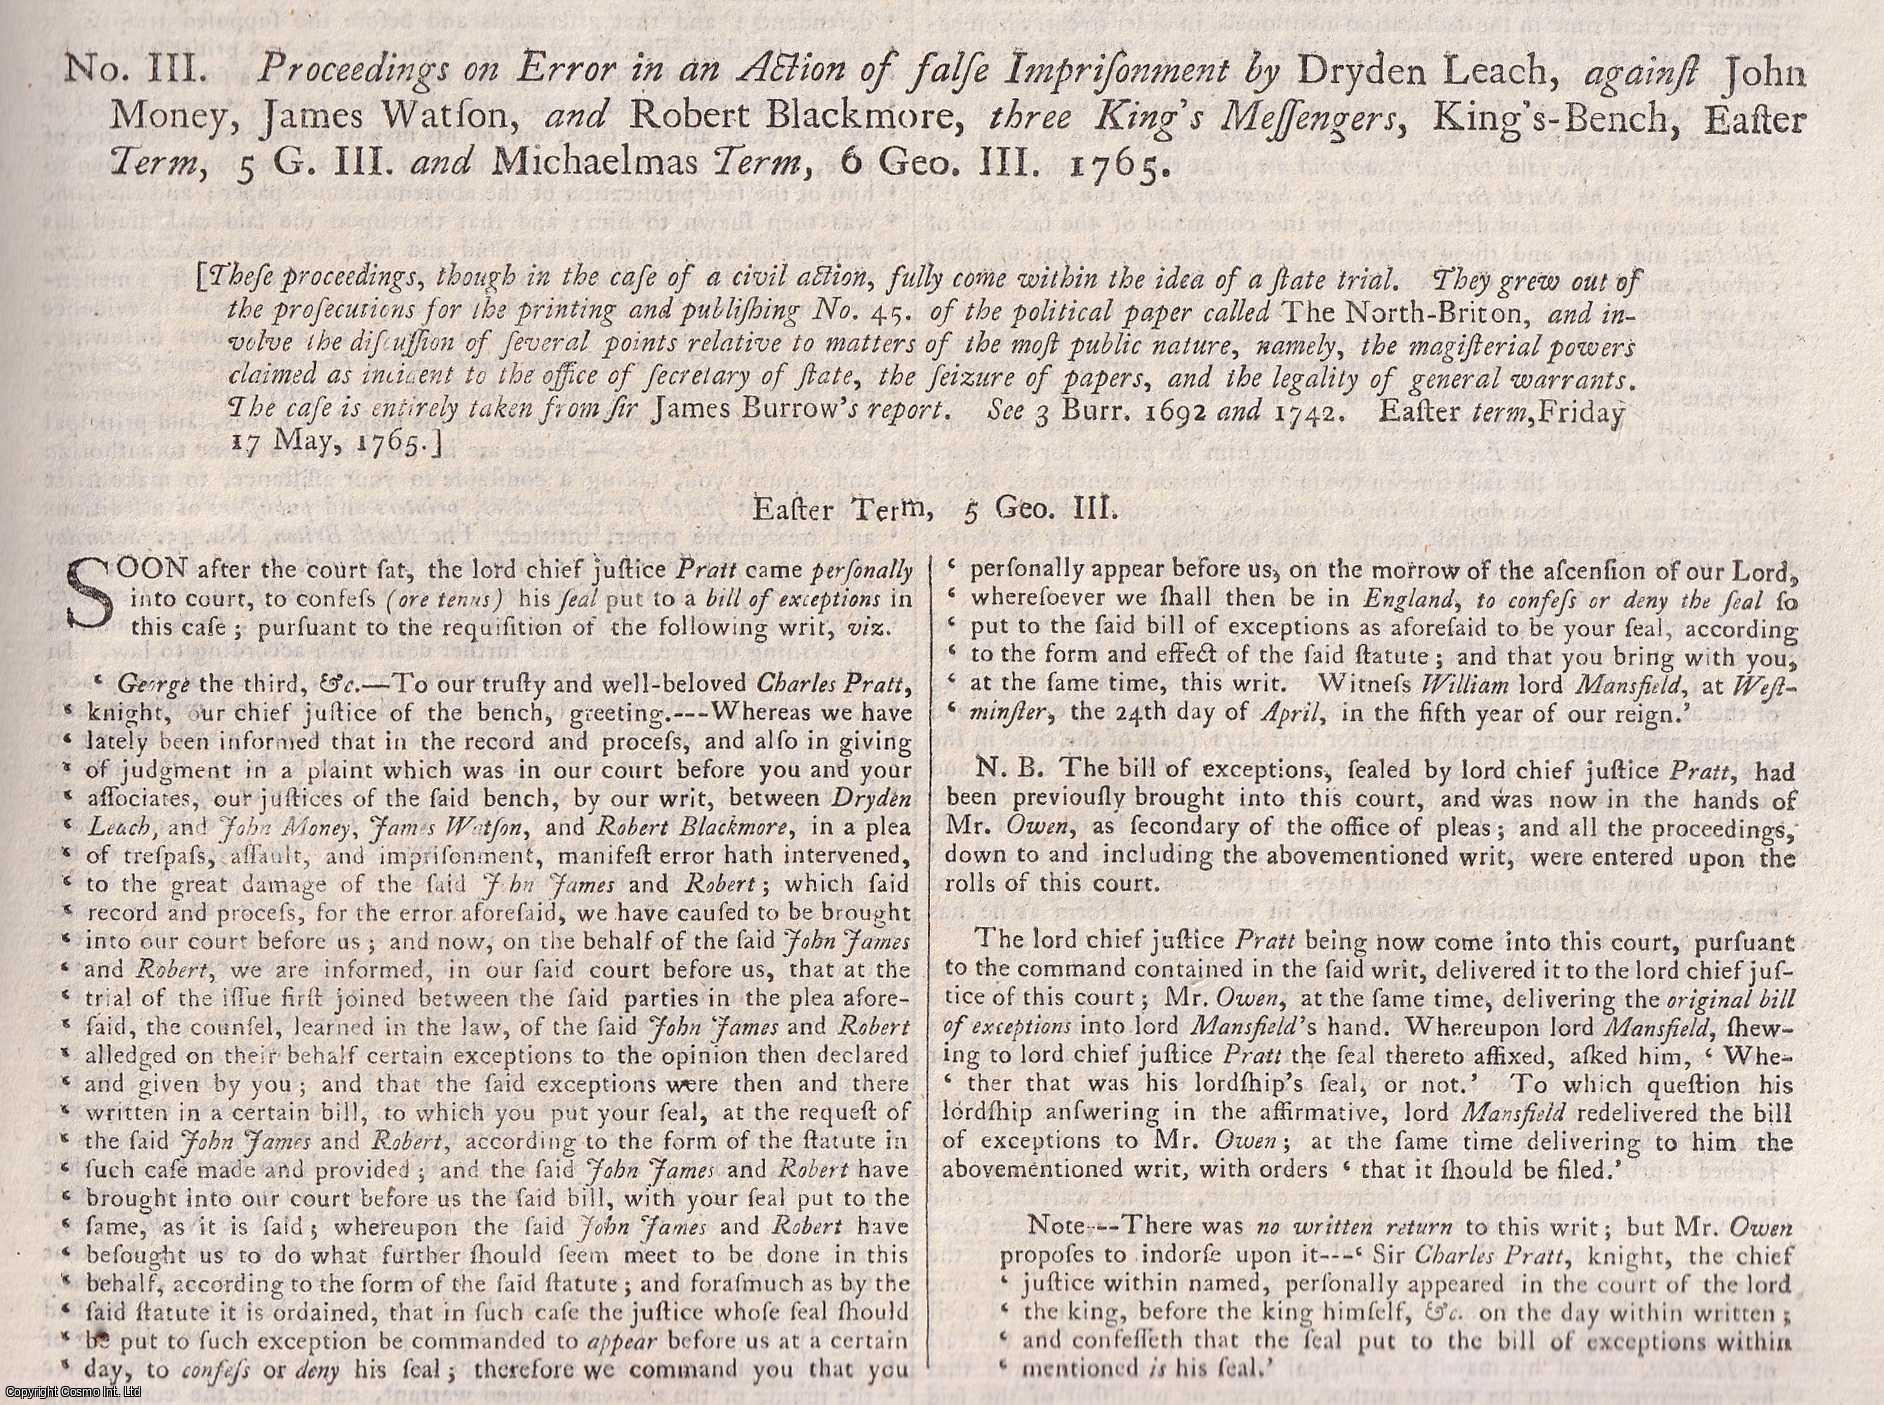 [Trial] - THE NORTH BRITON. Proceedings on an Error in an Action of False Imprisonment by Dryden Leach, against John Money, James Watson, and Robert Blackmore, three King's Messengers, King's Bench, 1765. An original article from the Collected State Trials.